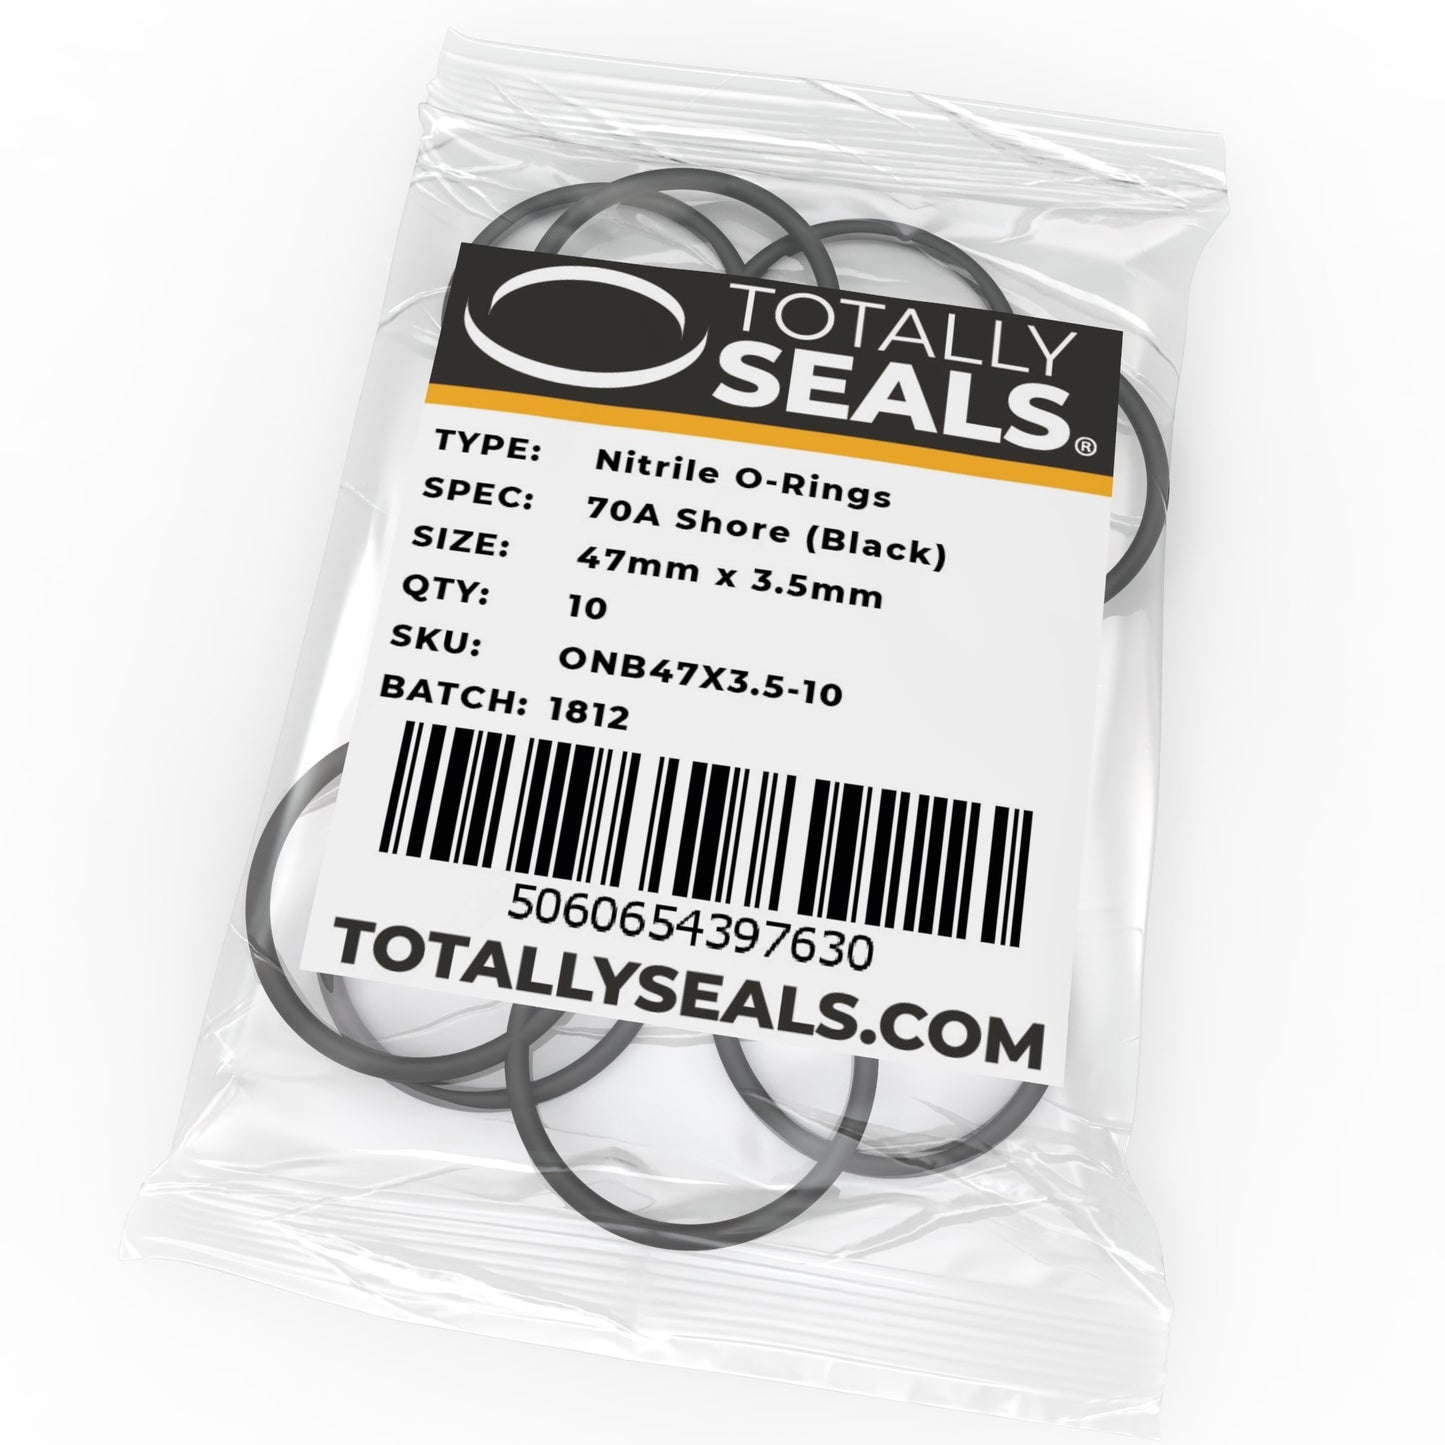 47mm x 3.5mm (54mm OD) Nitrile O-Rings - Totally Seals®